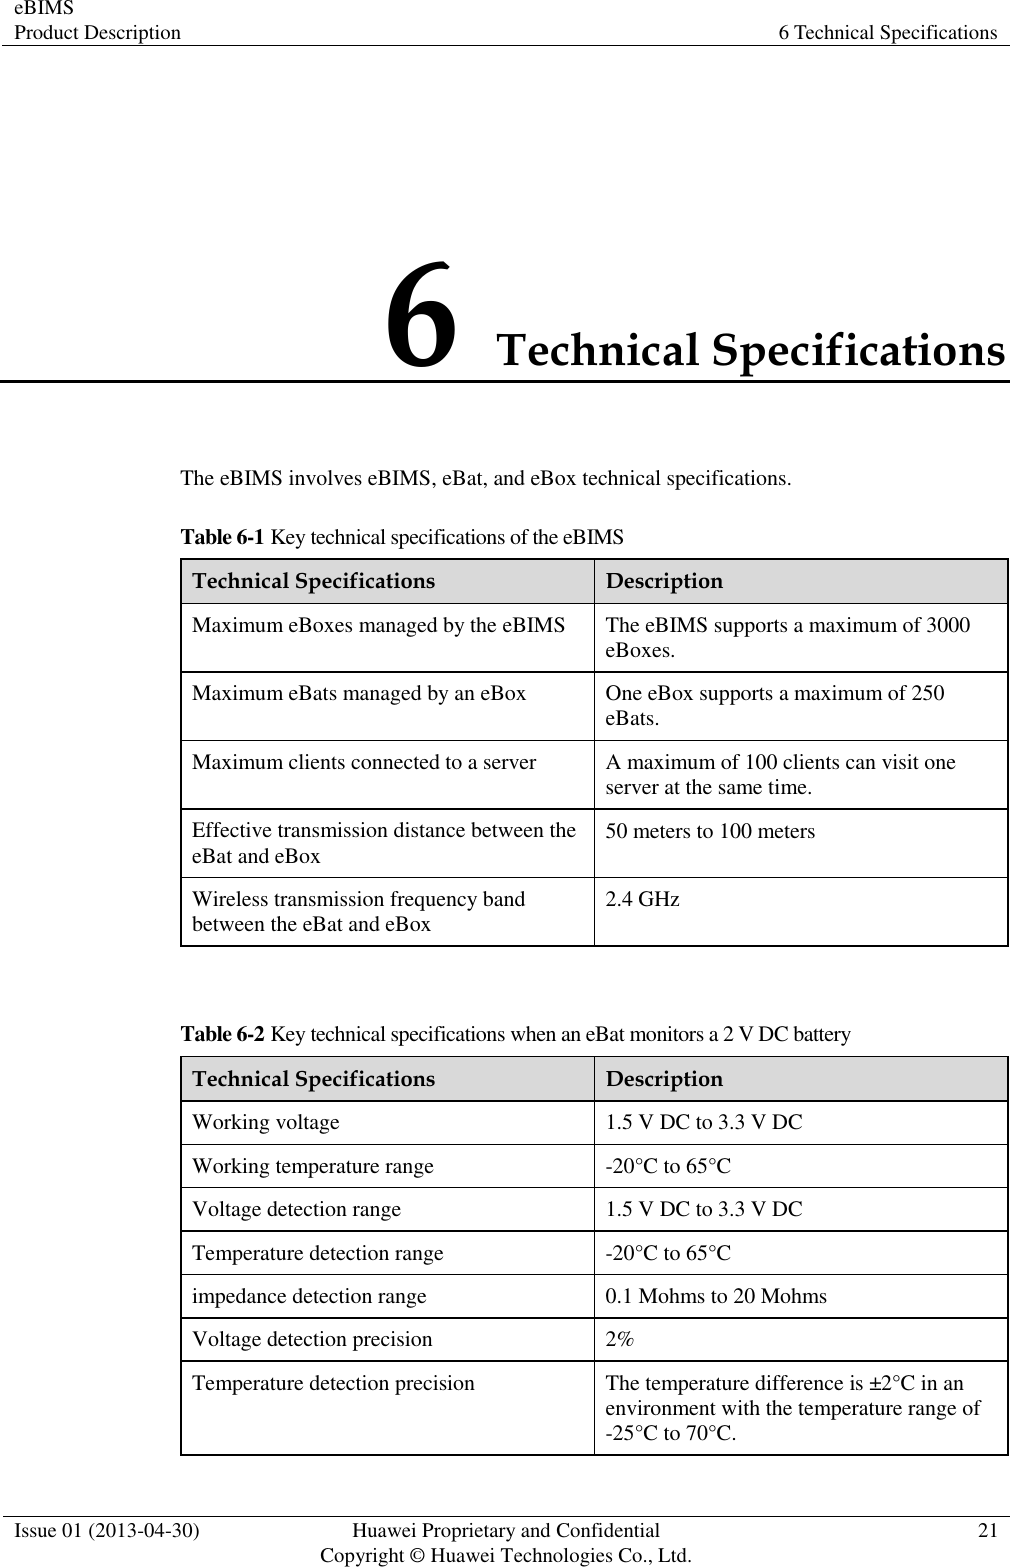 eBIMS Product Description 6 Technical Specifications  Issue 01 (2013-04-30) Huawei Proprietary and Confidential                                     Copyright © Huawei Technologies Co., Ltd. 21  6 Technical Specifications The eBIMS involves eBIMS, eBat, and eBox technical specifications. Table 6-1 Key technical specifications of the eBIMS Technical Specifications Description Maximum eBoxes managed by the eBIMS The eBIMS supports a maximum of 3000 eBoxes. Maximum eBats managed by an eBox One eBox supports a maximum of 250 eBats. Maximum clients connected to a server A maximum of 100 clients can visit one server at the same time. Effective transmission distance between the eBat and eBox 50 meters to 100 meters Wireless transmission frequency band between the eBat and eBox 2.4 GHz  Table 6-2 Key technical specifications when an eBat monitors a 2 V DC battery Technical Specifications Description Working voltage 1.5 V DC to 3.3 V DC Working temperature range -20°C to 65°C Voltage detection range 1.5 V DC to 3.3 V DC Temperature detection range -20°C to 65°C impedance detection range 0.1 Mohms to 20 Mohms Voltage detection precision 2% Temperature detection precision The temperature difference is ±2°C in an environment with the temperature range of -25°C to 70°C. 